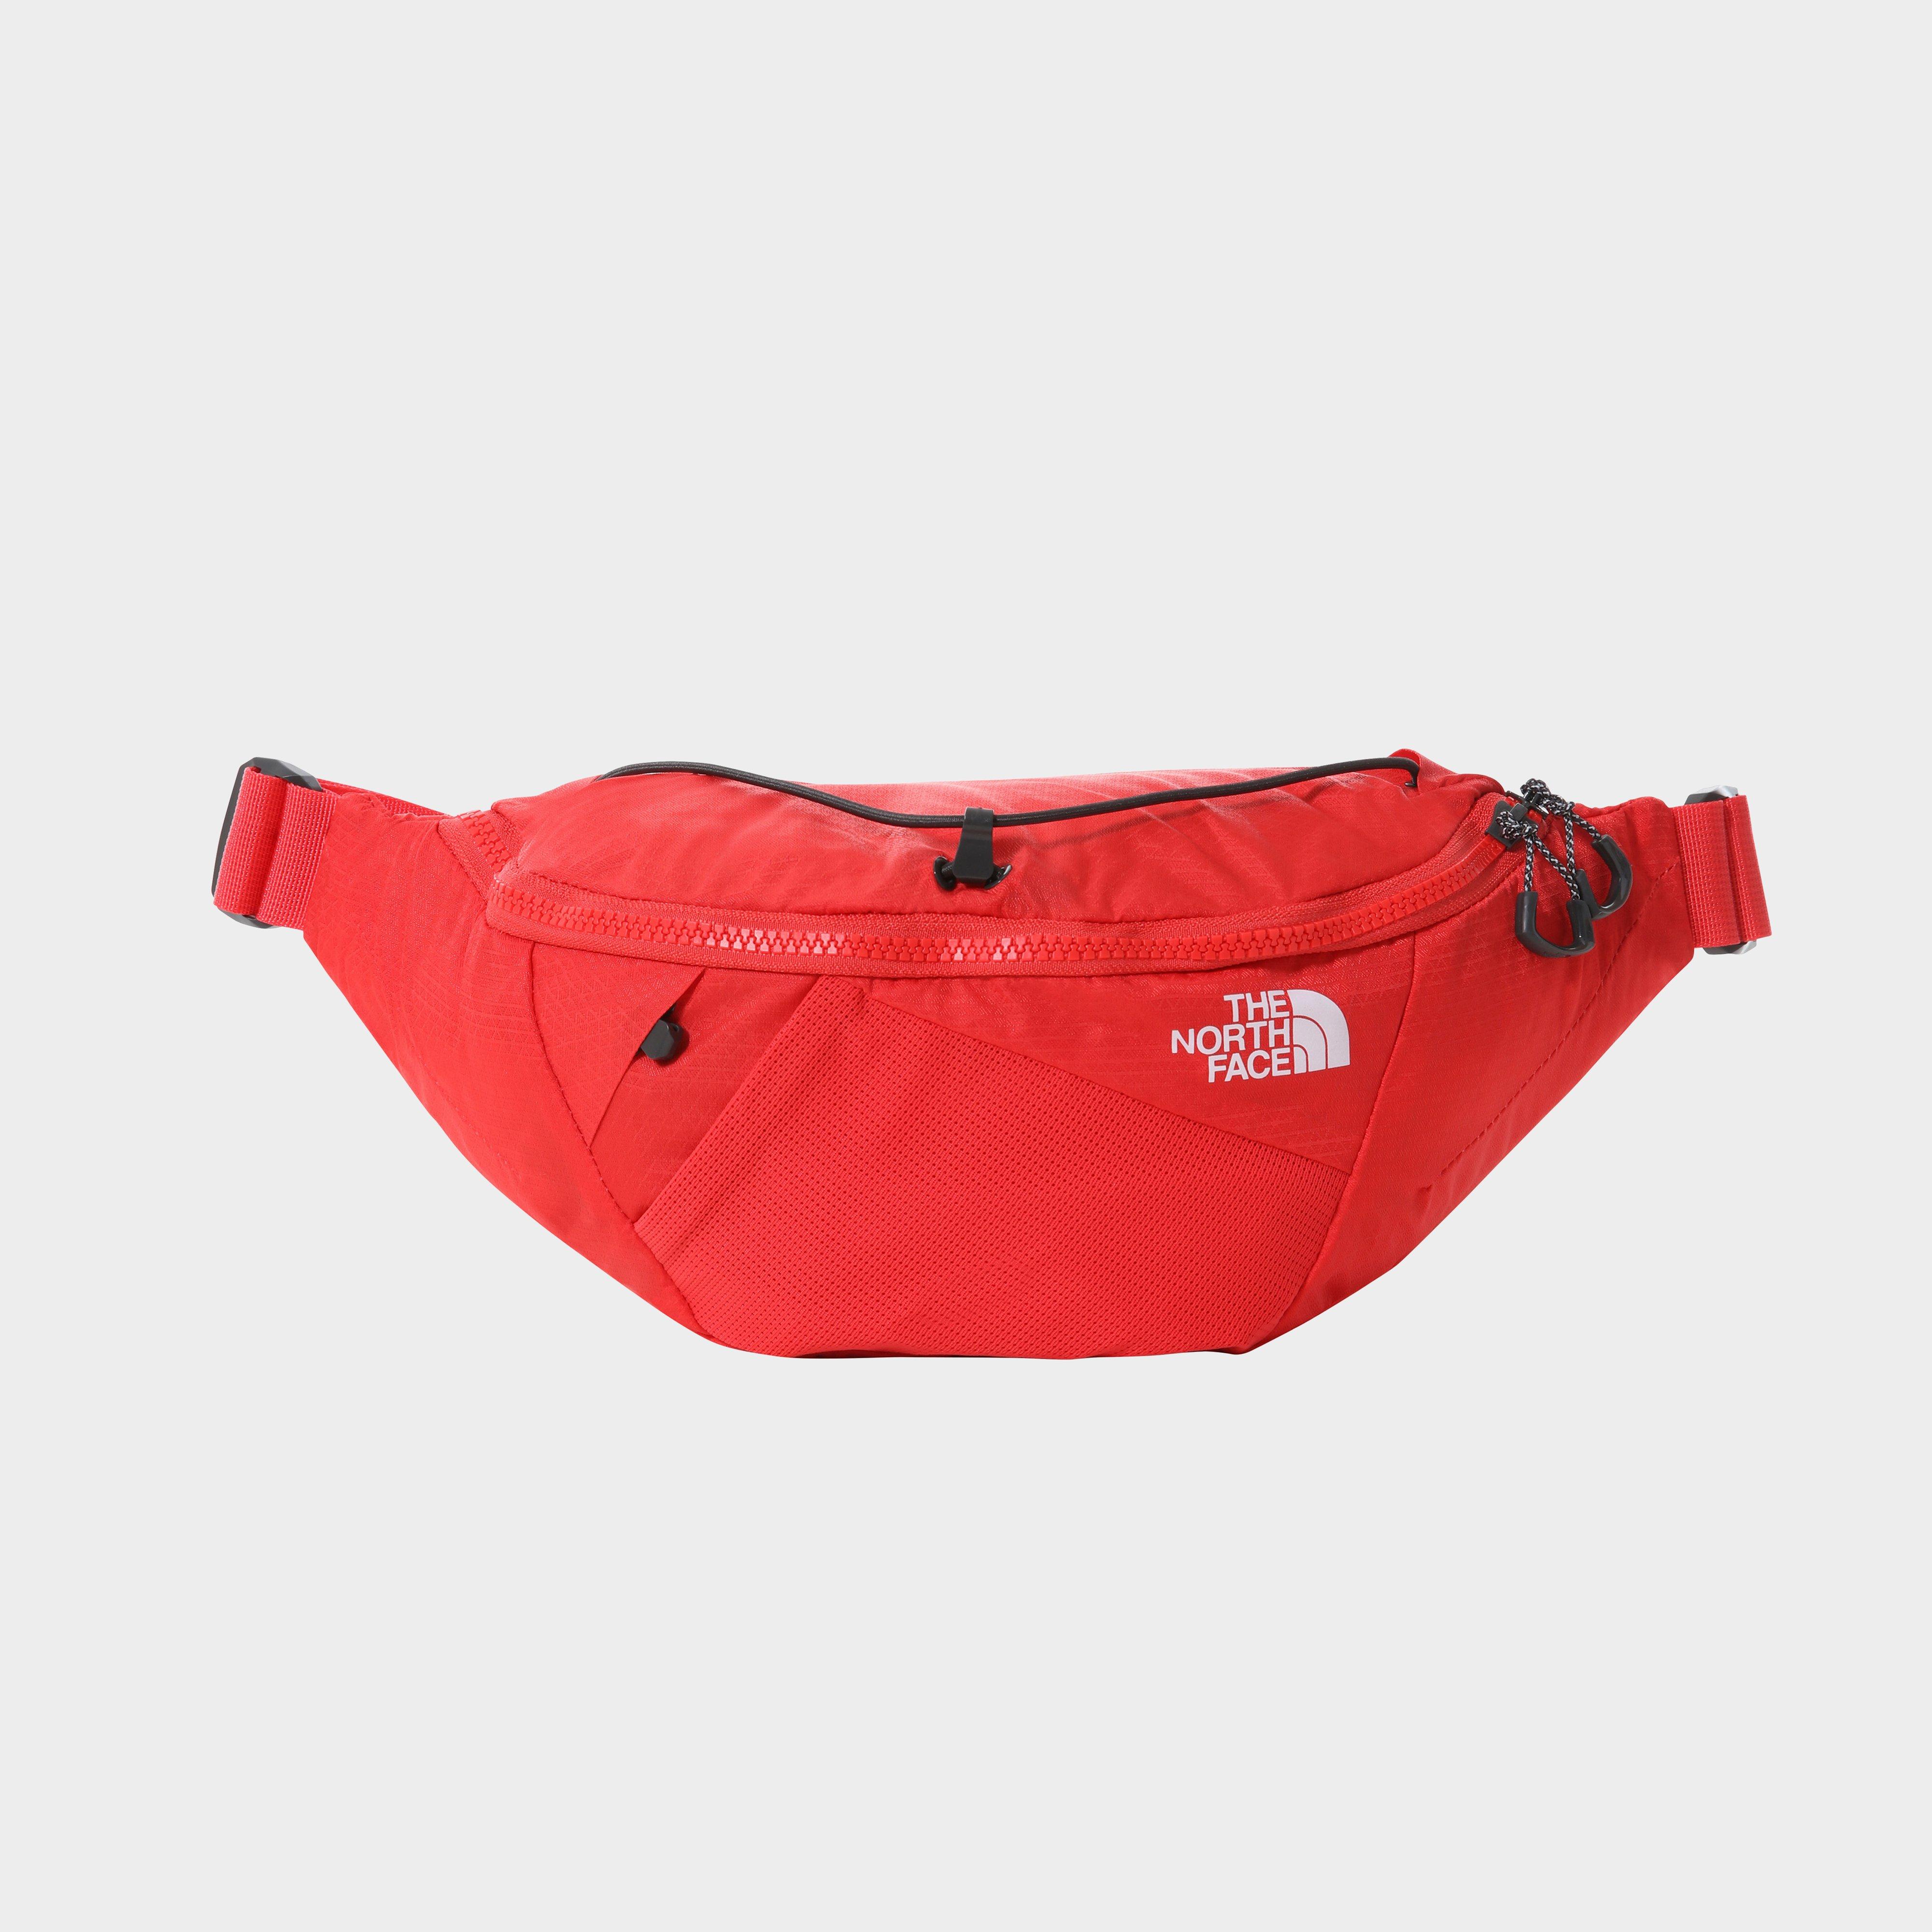 The North Face The North Face Lumbnical Lumbar Side Bag - Red/red  Red/red